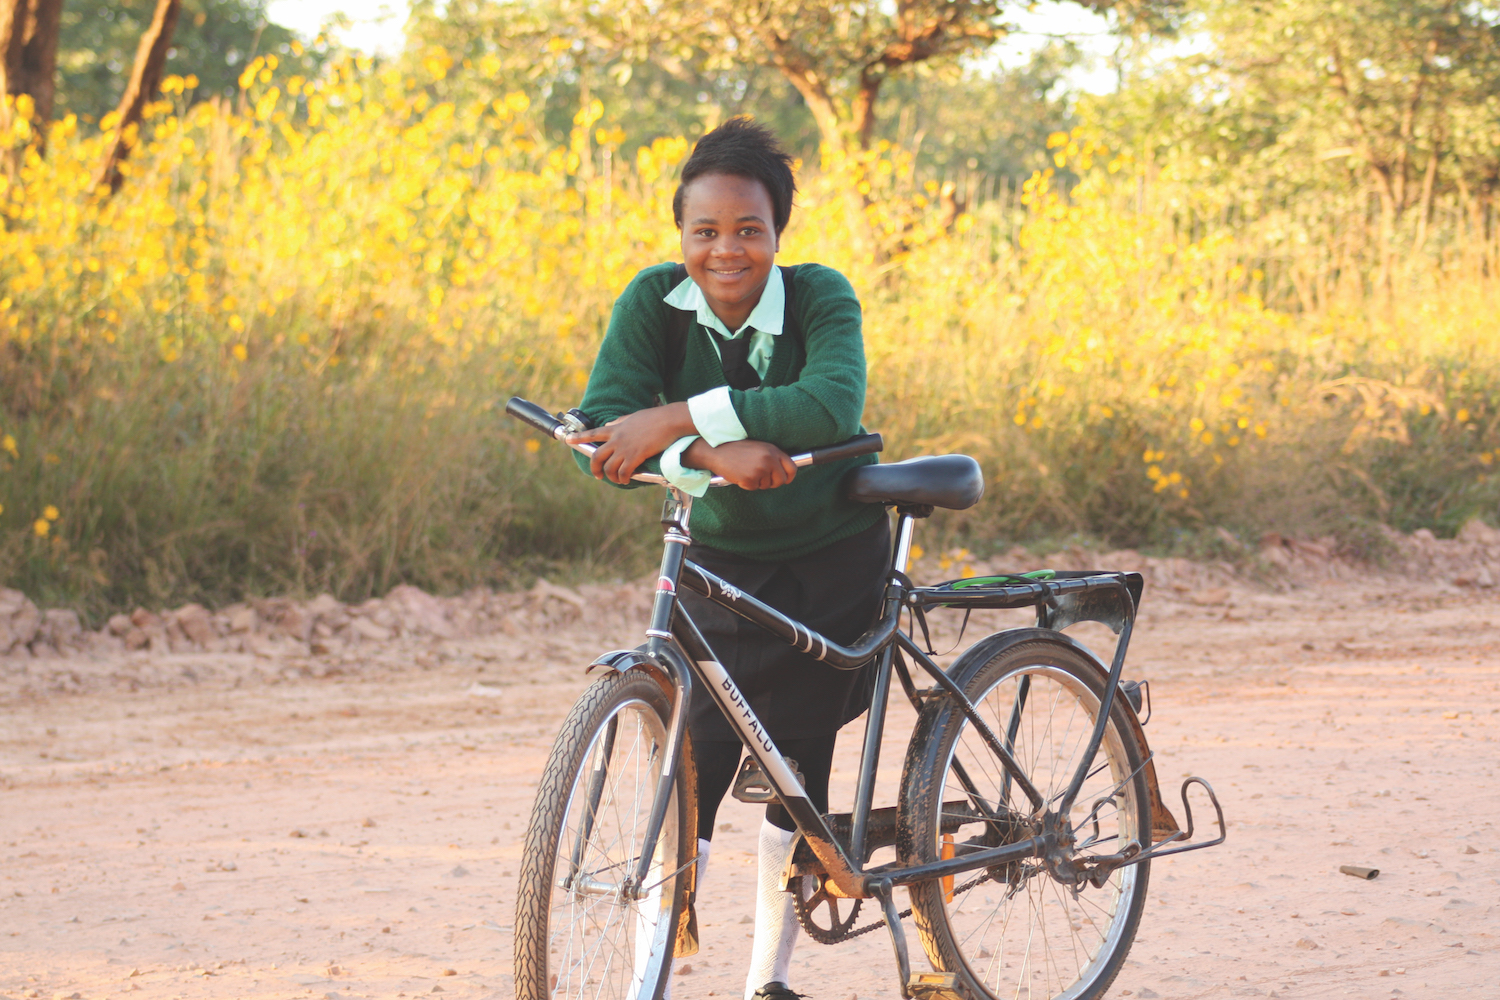 Buffalo Bicycles, manufactured by Giant Group, were designed by World Bicycle Relief for heavy loads, long distances and rugged terrain. Donating these bikes to regions in need helps mobilize people including students and health workers. 